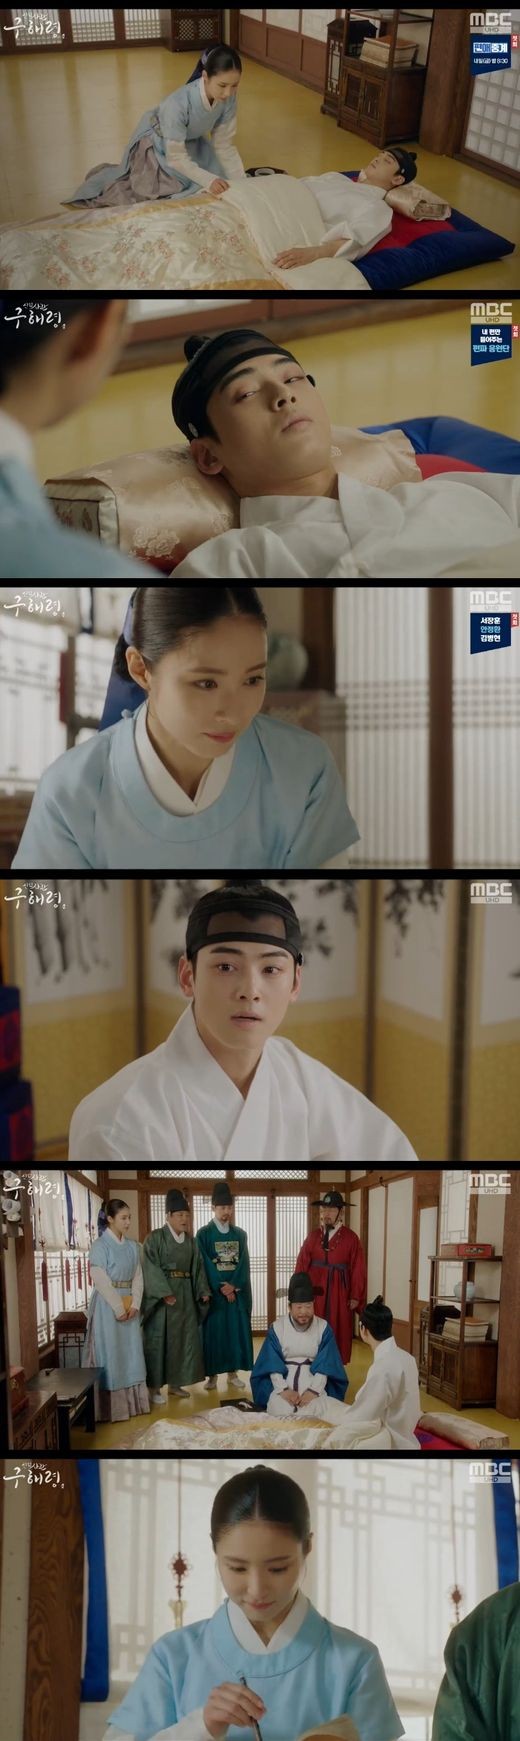 For saving the people. Can Shin Se-kyung save Jung Eun-woo with a brush?In MBCs Na Hae-ryung broadcast on the 8th, Lee Rim (Jung Eun-woo) was shown a scene where he was forced to withdraw from the king even after preventing plague by the law of Udujong.On this day, Irim tried to implement the udulloma method to prevent the iris, but faced the cold reaction of the people. The udulloma method is a procedure to inject pus of cows to prevent the iris.Lee Lim gave a fuss to inject the juice directly into his arm.In the opposition of his servants, including Heo Sam-bo (Sung Ji-ru), Lee Rim showed an exemplary Sejo of Joseon with a hemicephaly procedure in front of the people.When Irim was sick with a sore throat, the former Na Hae-ryung (Shin Se-kyung) nursed him; Irim, who had been asleep for a long time, woke up and fortunately, he also showed a driveway.Na Hae-ryung was relieved. Irim declared the enforcement of the law of the papilloma throughout the country.Lee also gave the toiled old Na Hae-ryung a hand-off.How much you worried about me is half-faced, Irim said, hinting at the puzzled old Na Hae-ryung.But Na Hae-ryung said, Me? Ive been eating well and sleeping very well.There is no one here to do anything, and I have been very diligent and very diligent for a walk in the morning and evening. After all, Irim turned away, saying, How can you get along? Sejo of Joseon is lying sick. I know. I know as well as I worry.Na Hae-ryung laughed at the sprinkling of the limp.Sejo of JoseonMama, Im happy, Mama woke up, said Na Hae-ryung, who was honest. Irim also got back to his smile.Lee Rim went out of the palace with Na Hae-ryung and handed out barley to the people.If you leave it in a remote place, youll starve, youll just starve, said Koo Hae-ryung, who was watching the two men who had made the mistake.When Irim had a side dish during the meal, Na Hae-ryung returned a cold face, and Irim stepped back, saying, There may be no side dish.This time, Irim was reborn as a Sejo of Joseon who counted the people, but the reaction of the king was cold.He slapped Irim on the cheek and shouted, Do you really want me to be strong even if I ignore the name?Irim said, Yes, I ignored the name, and I was instructed to return to Hanyang for the prohibition of the law of the king, but I did not follow it. Please forgive me.But the king responded with exasperation, saying, You are revealing your true color, and even if you ignore the king, you do not know the shame of the king.Irim explained that it was a choice for the people, and he said, What do you know about the people? The man who lived in the palace for the rest of his life.He then tried to punish Irim, but Crown Prince Lee Jin (Park Ki-woong) appeared and dissuaded him.Na Hae-ryung and Min Woo-won, who are trying to keep the brush with the brush, raised questions about the development.